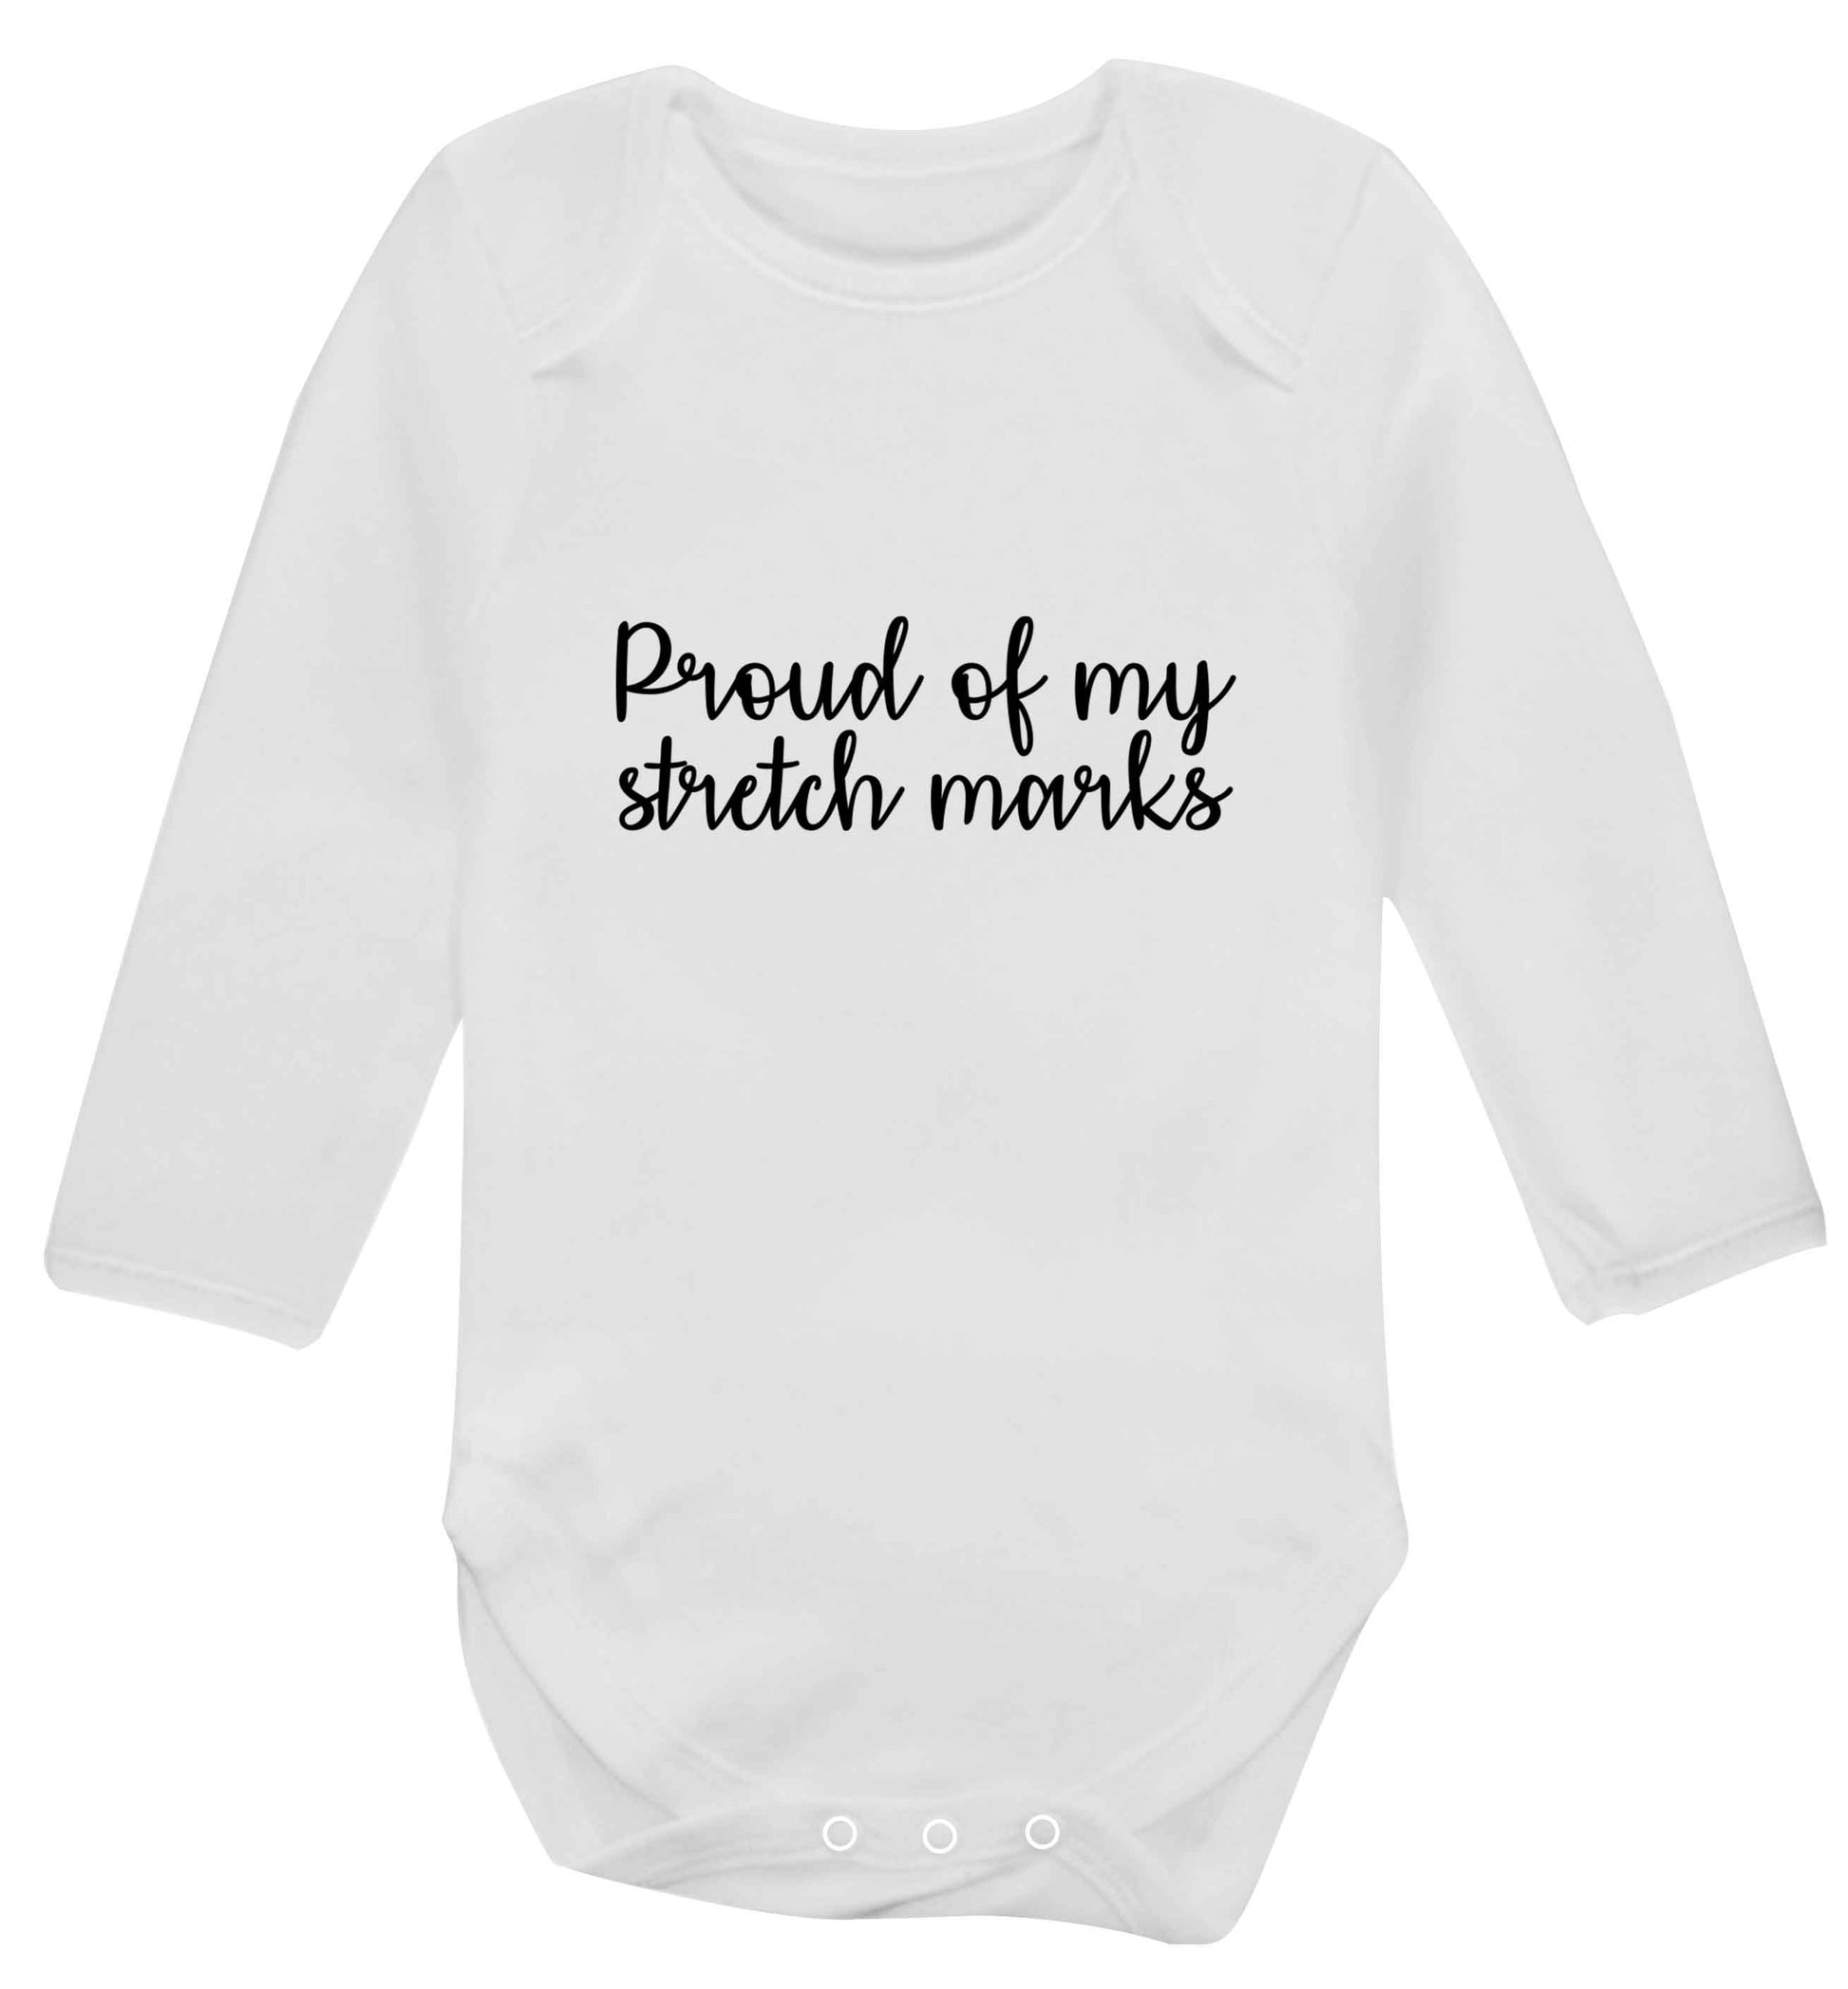 Proud of my stretch marks baby vest long sleeved white 6-12 months